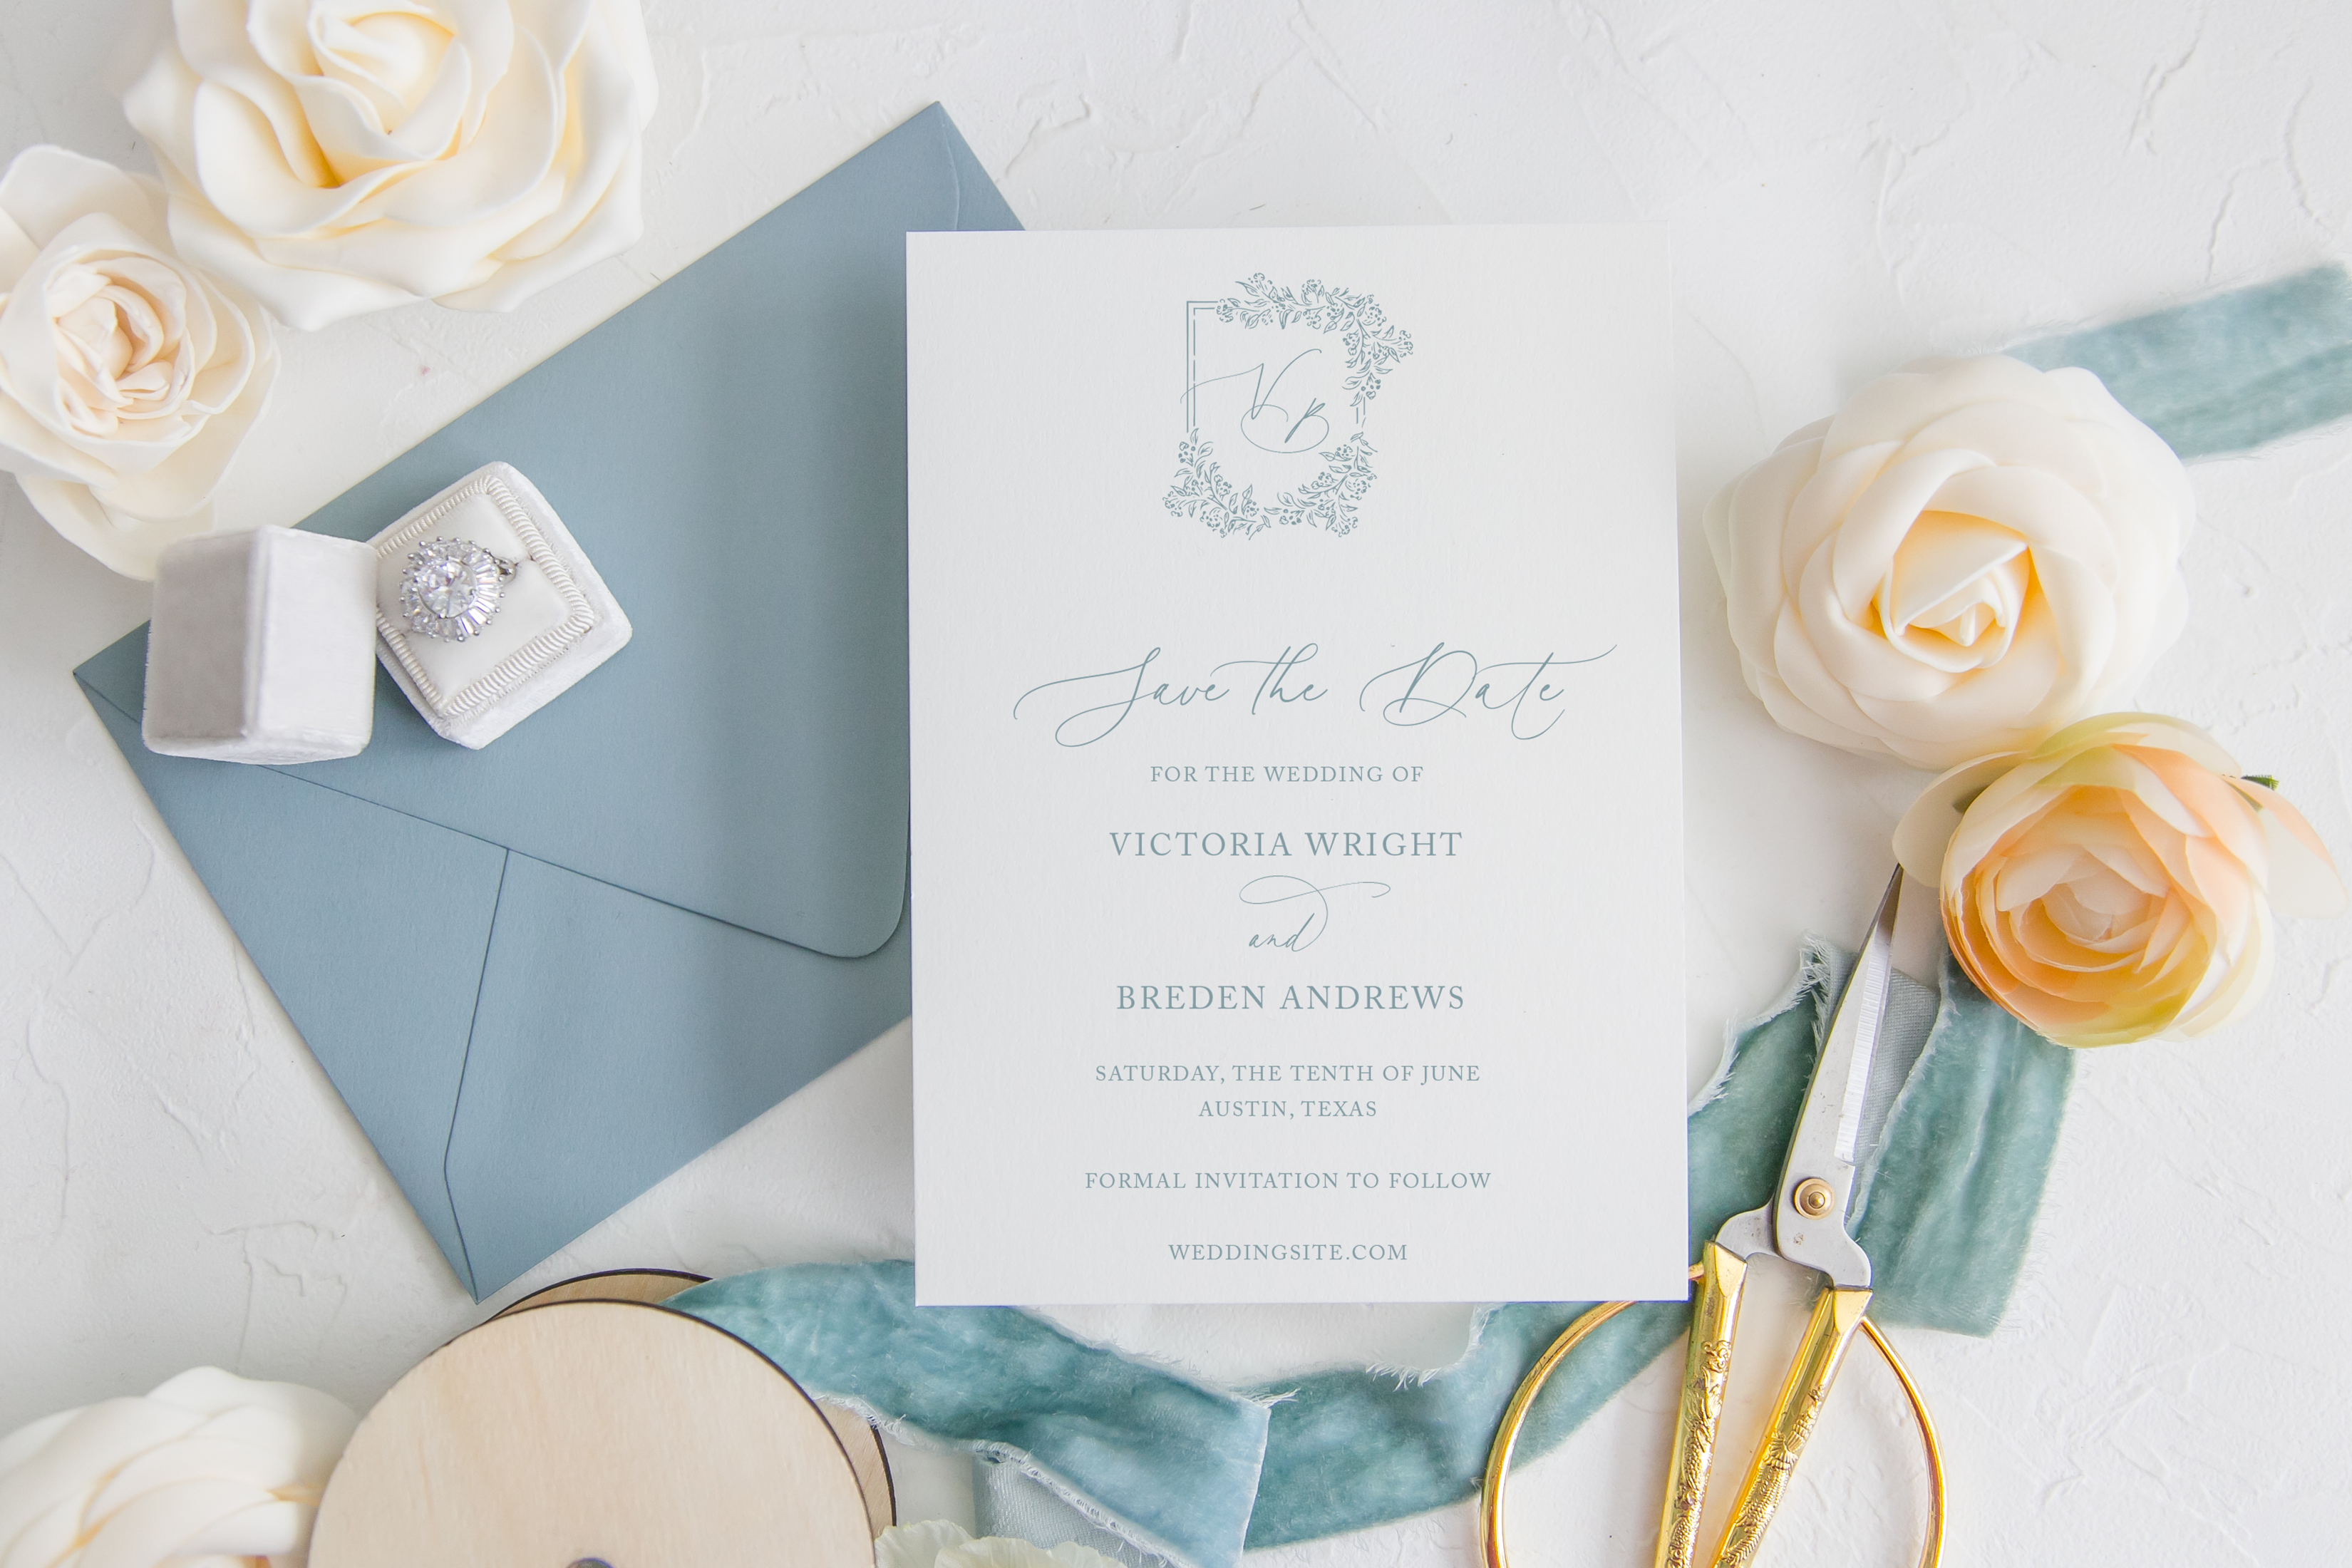 odette hand drawn flower calligraphy monogram crest save the date card